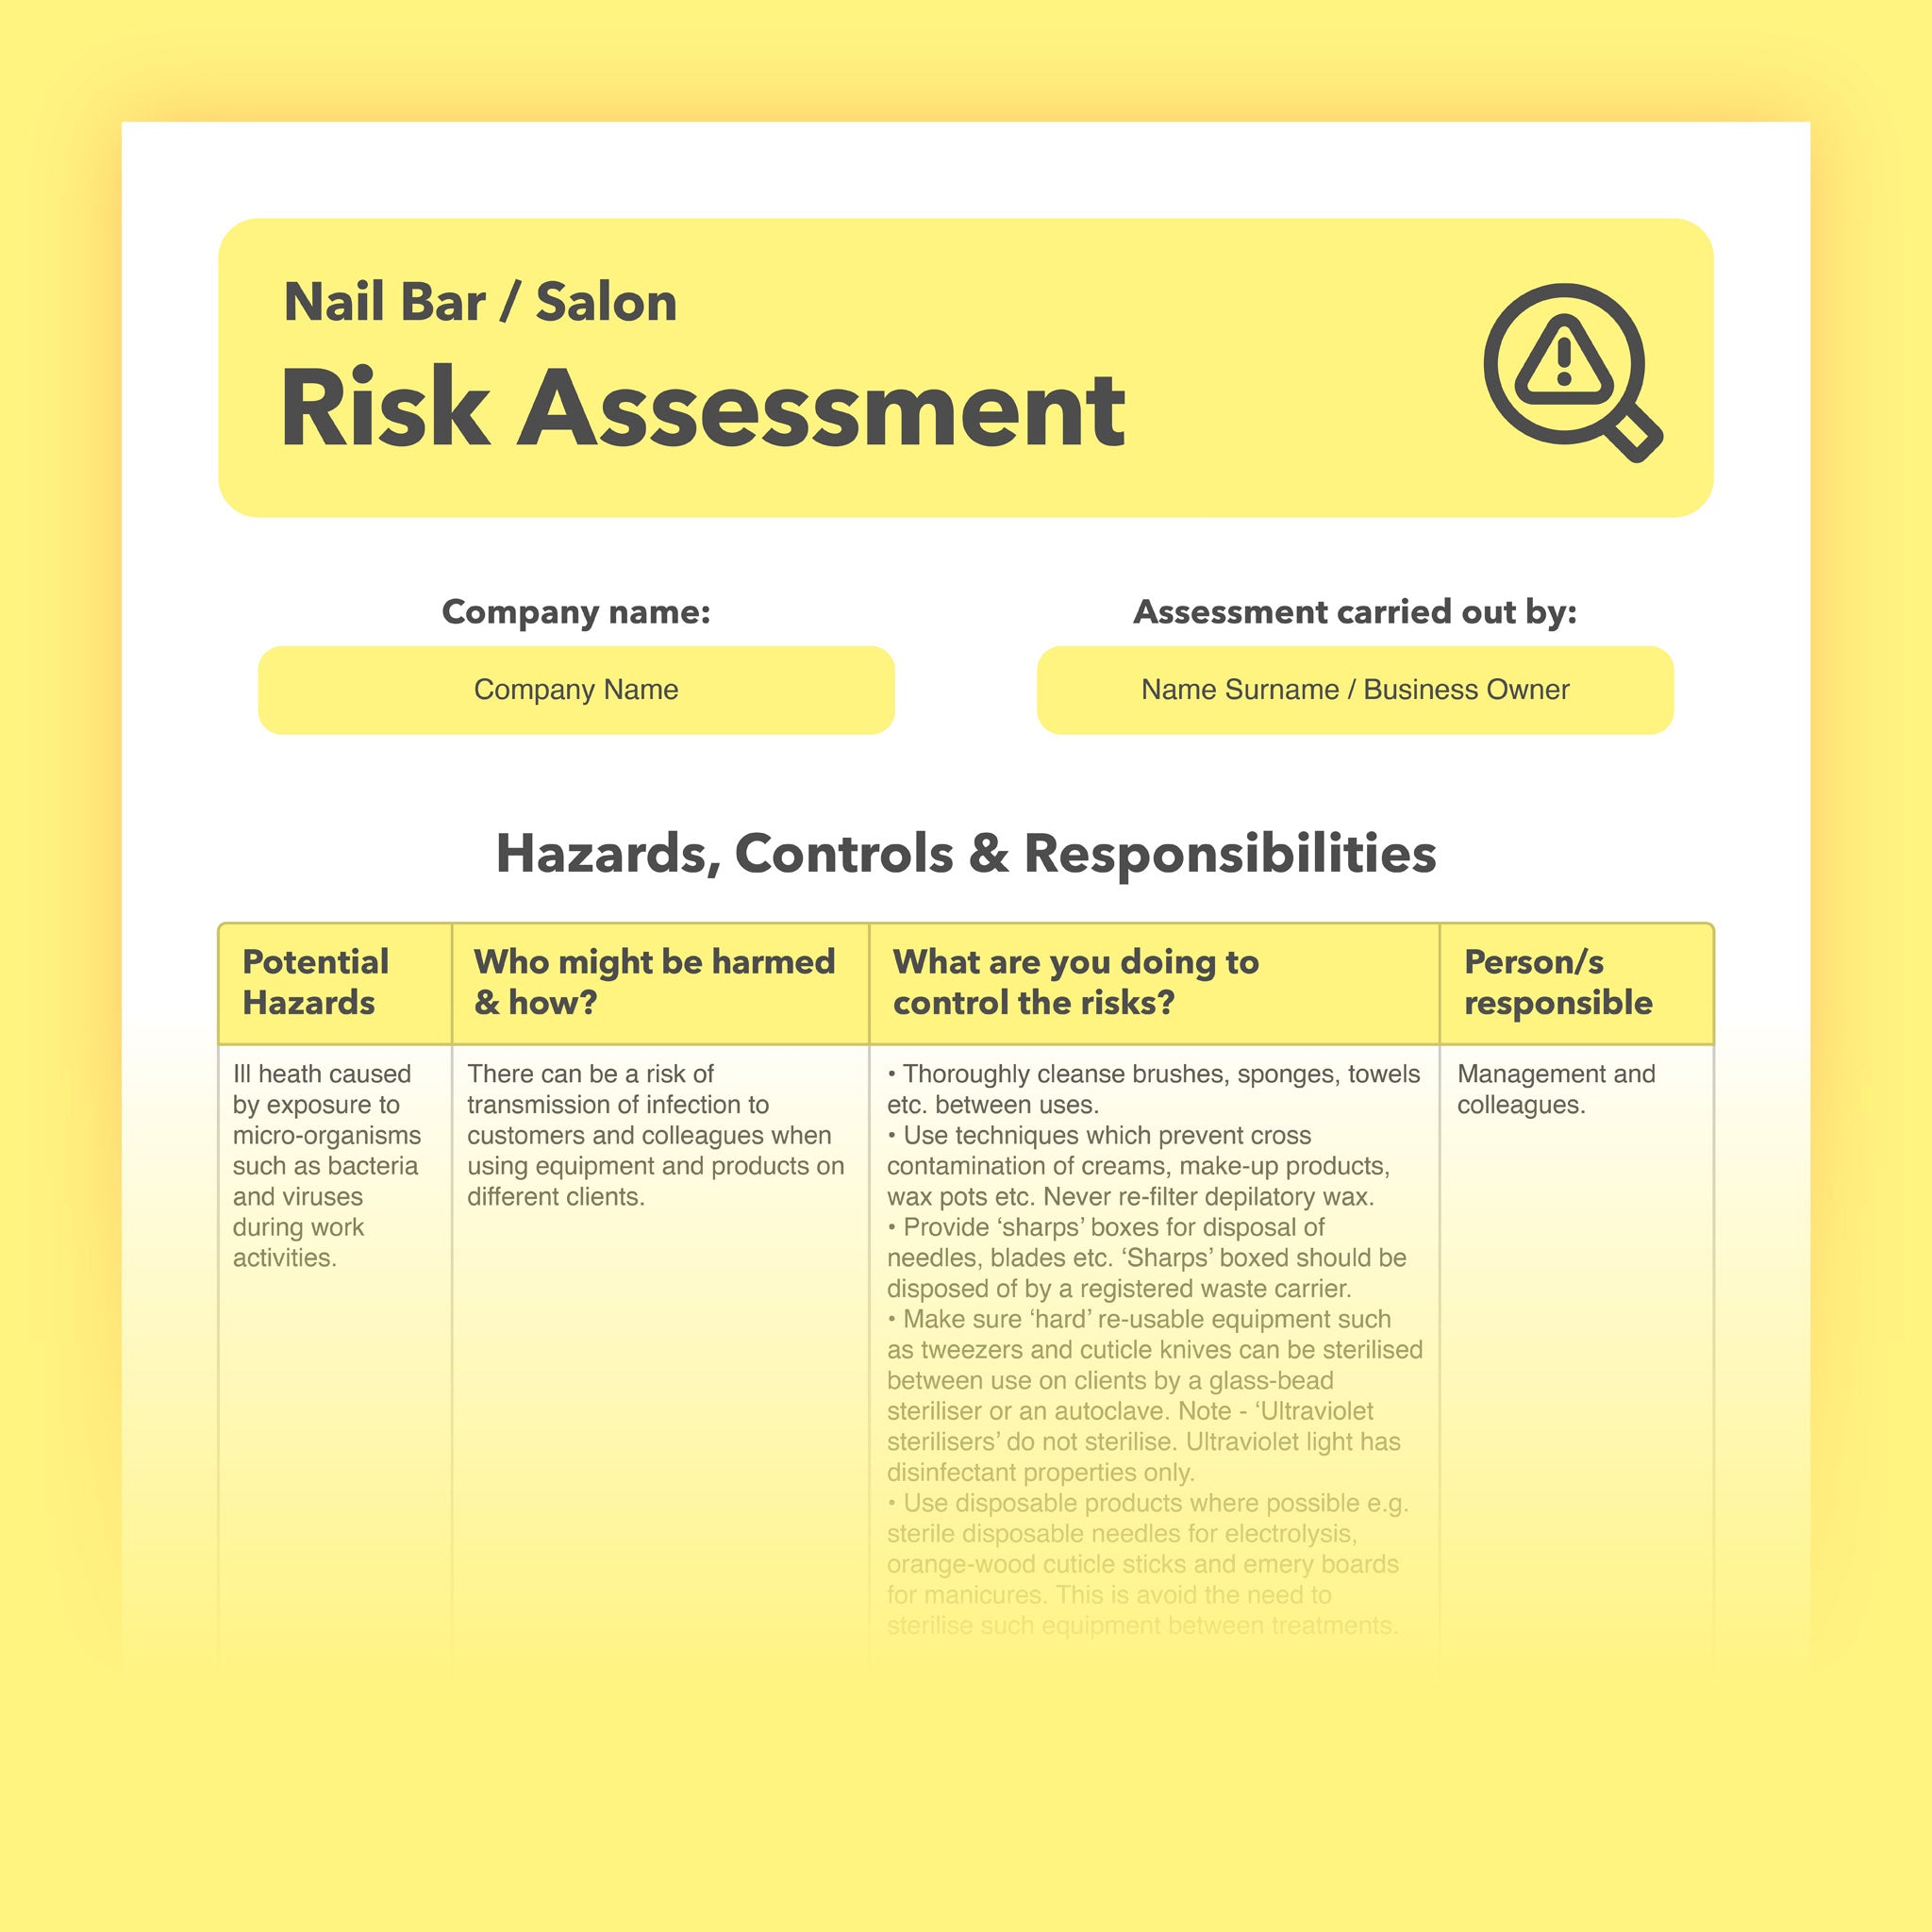 Risk Assessment - Beauty Salon | Available for Immediate Download